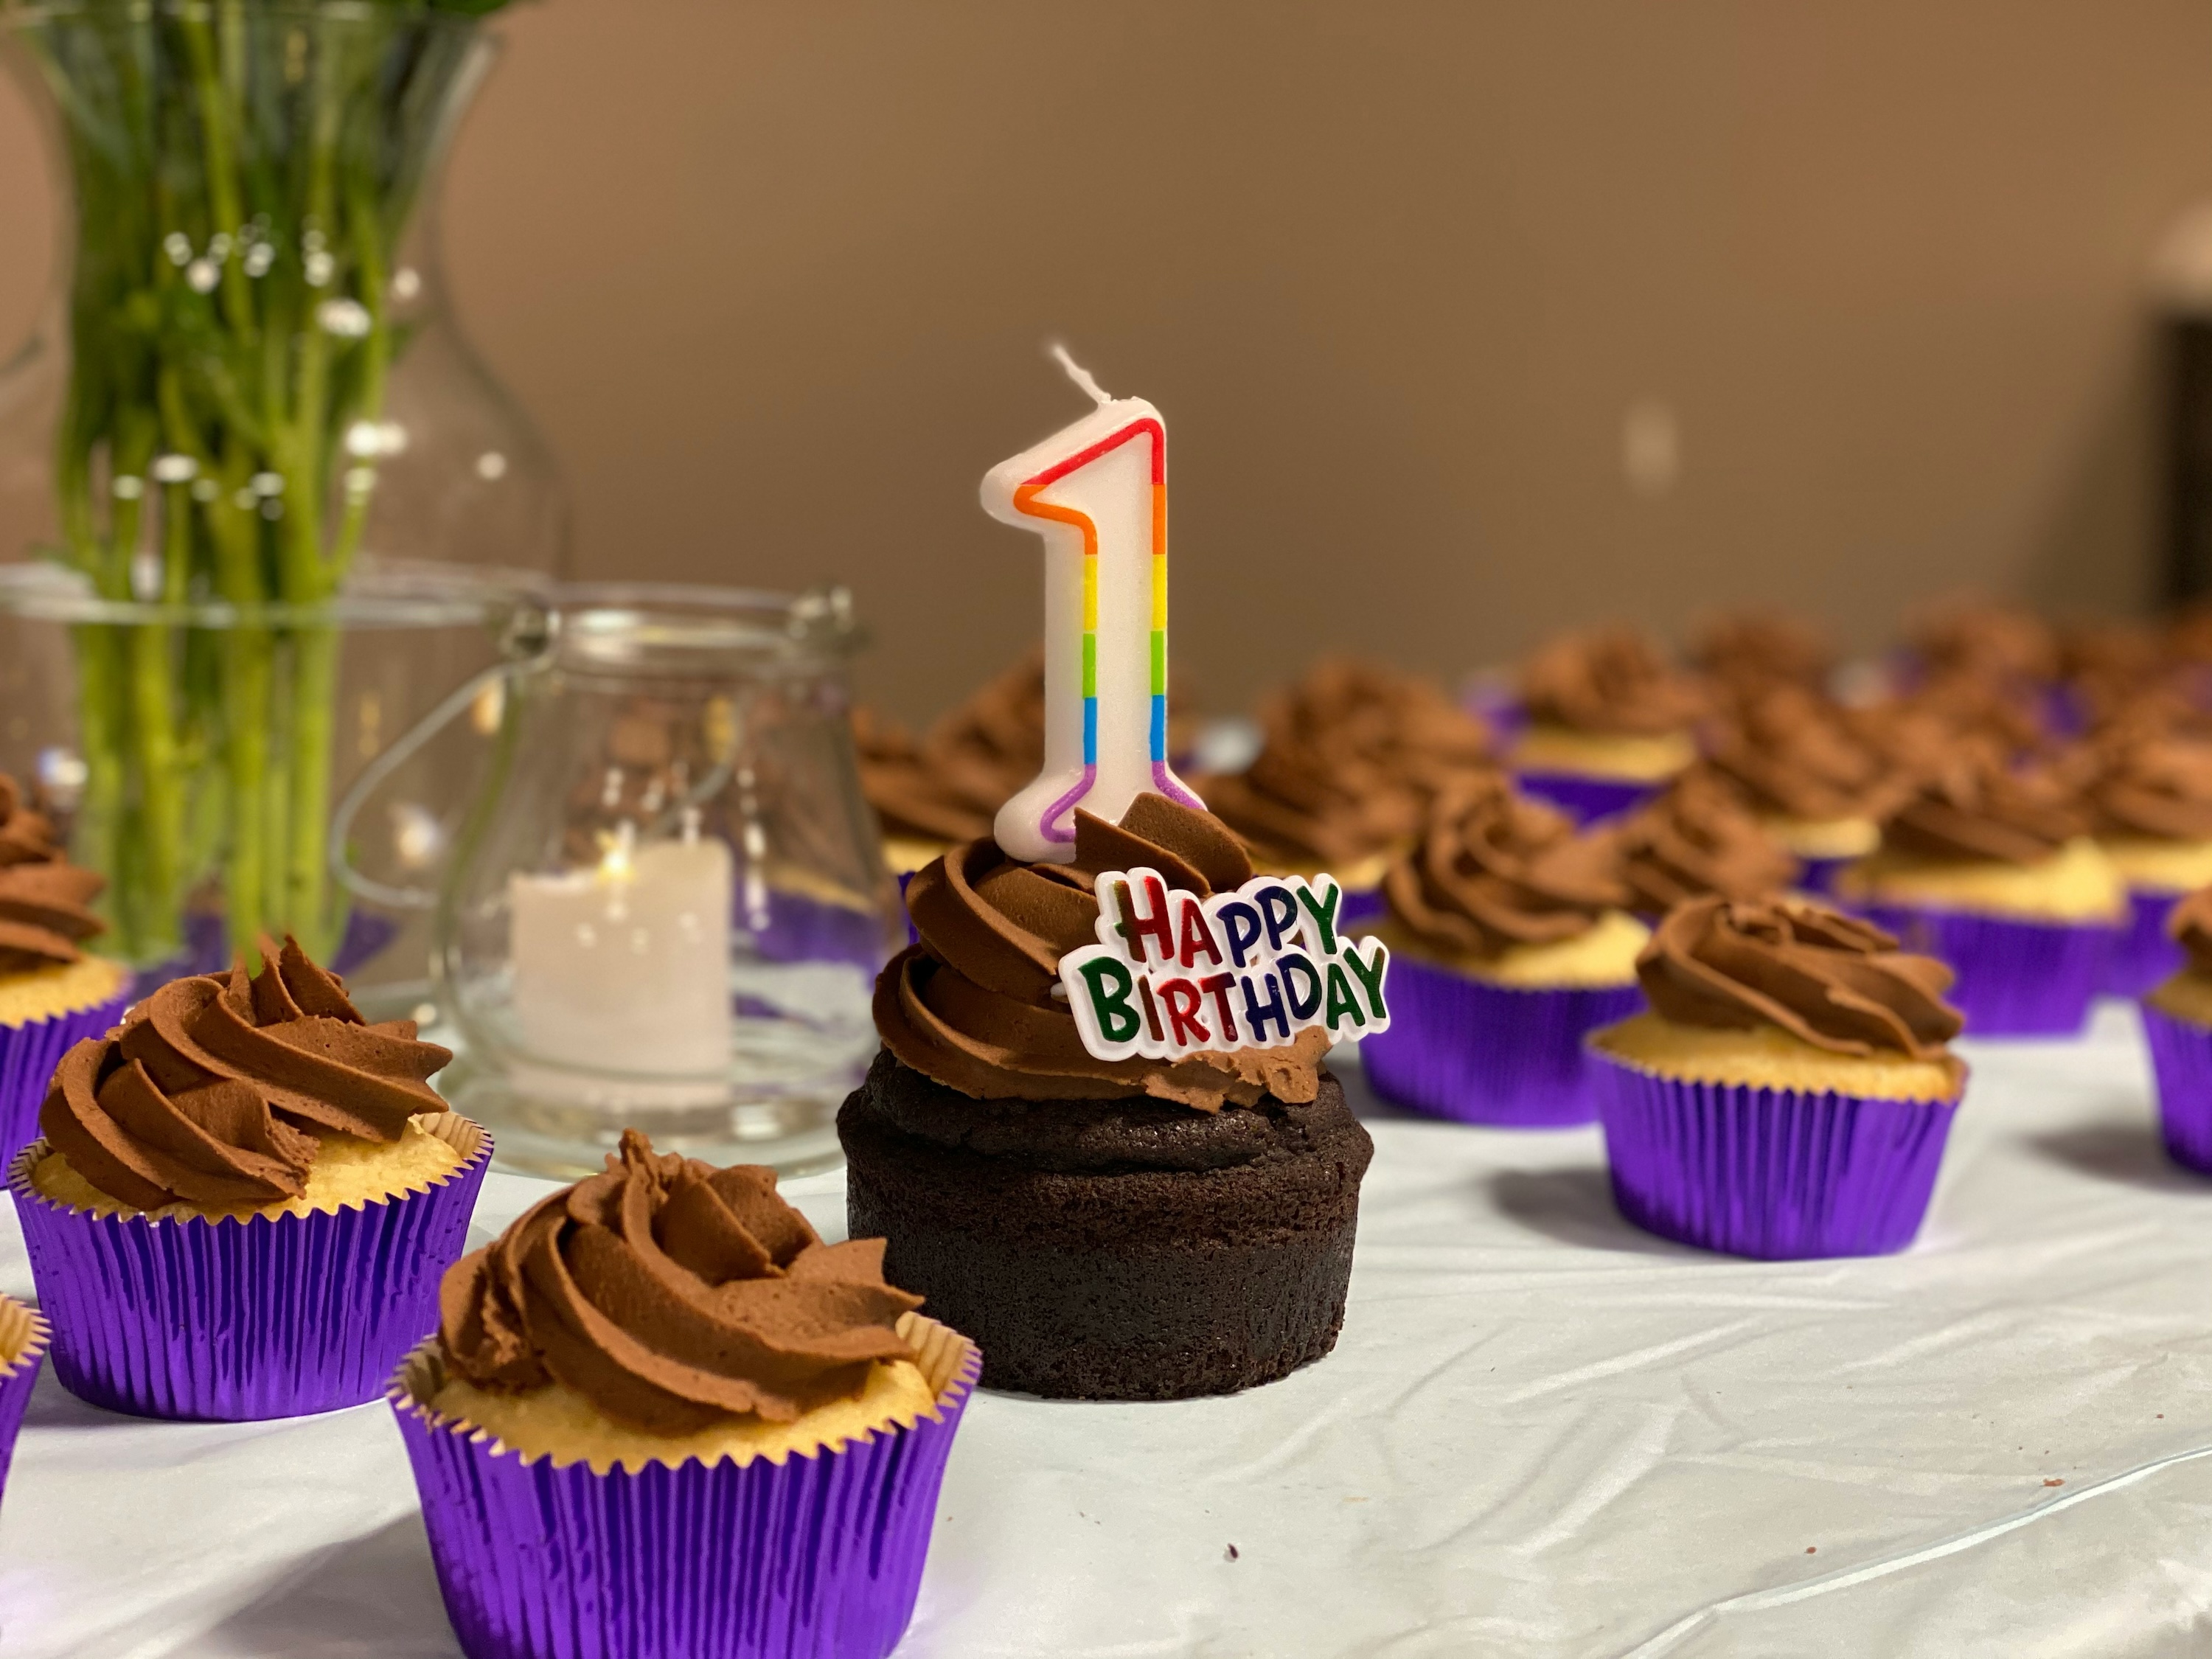 A chocolate cupcake with a happy birthday sign and a giant number one candle.